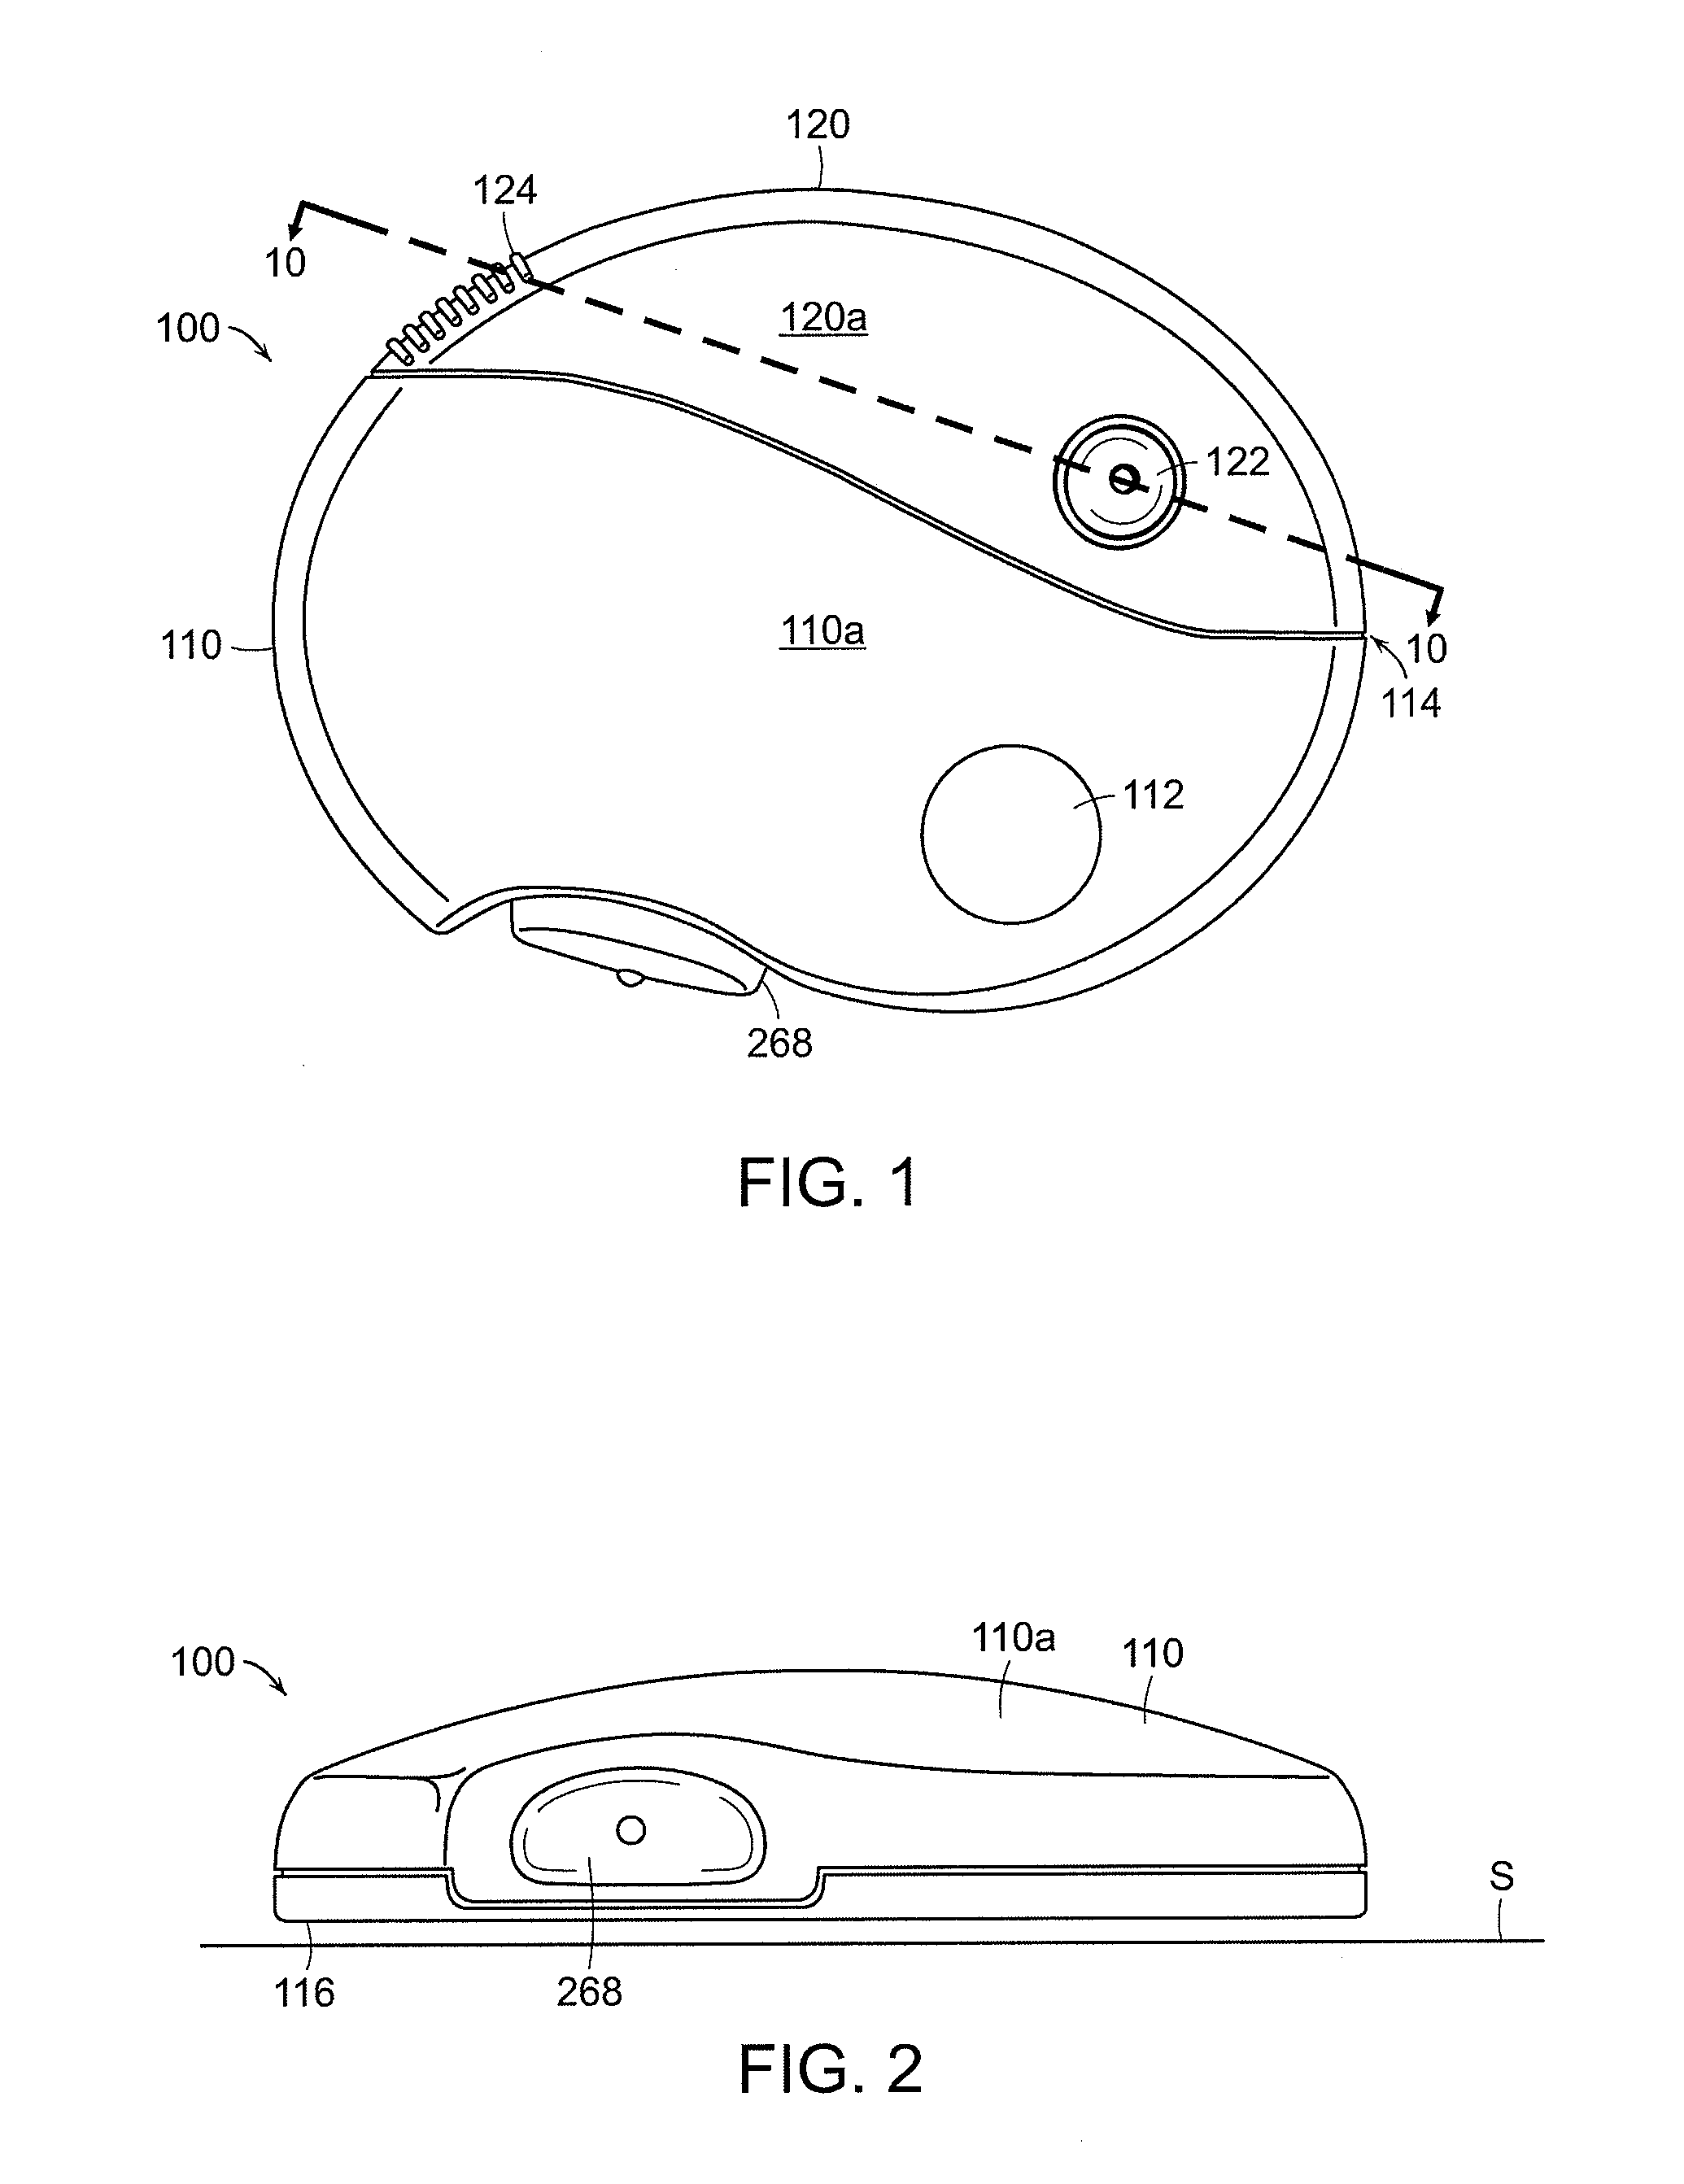 Methods for detecting failure states in a medicine delivery device